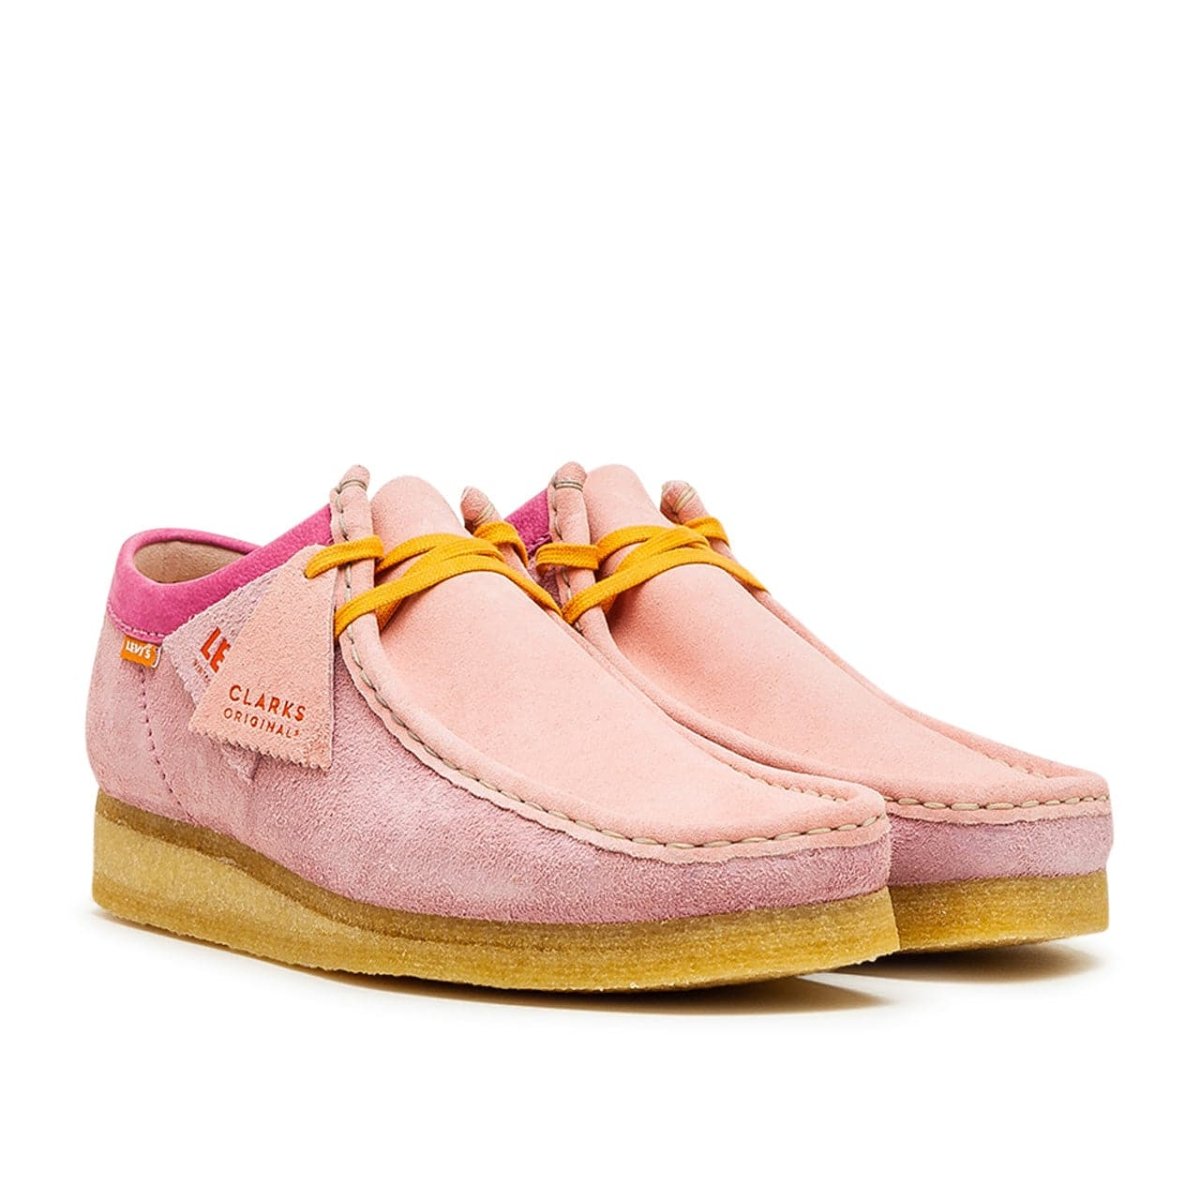 Clarks Originals x Levi's Vintage Clothing Wallabee (Pink) -261603227 –  Allike Store